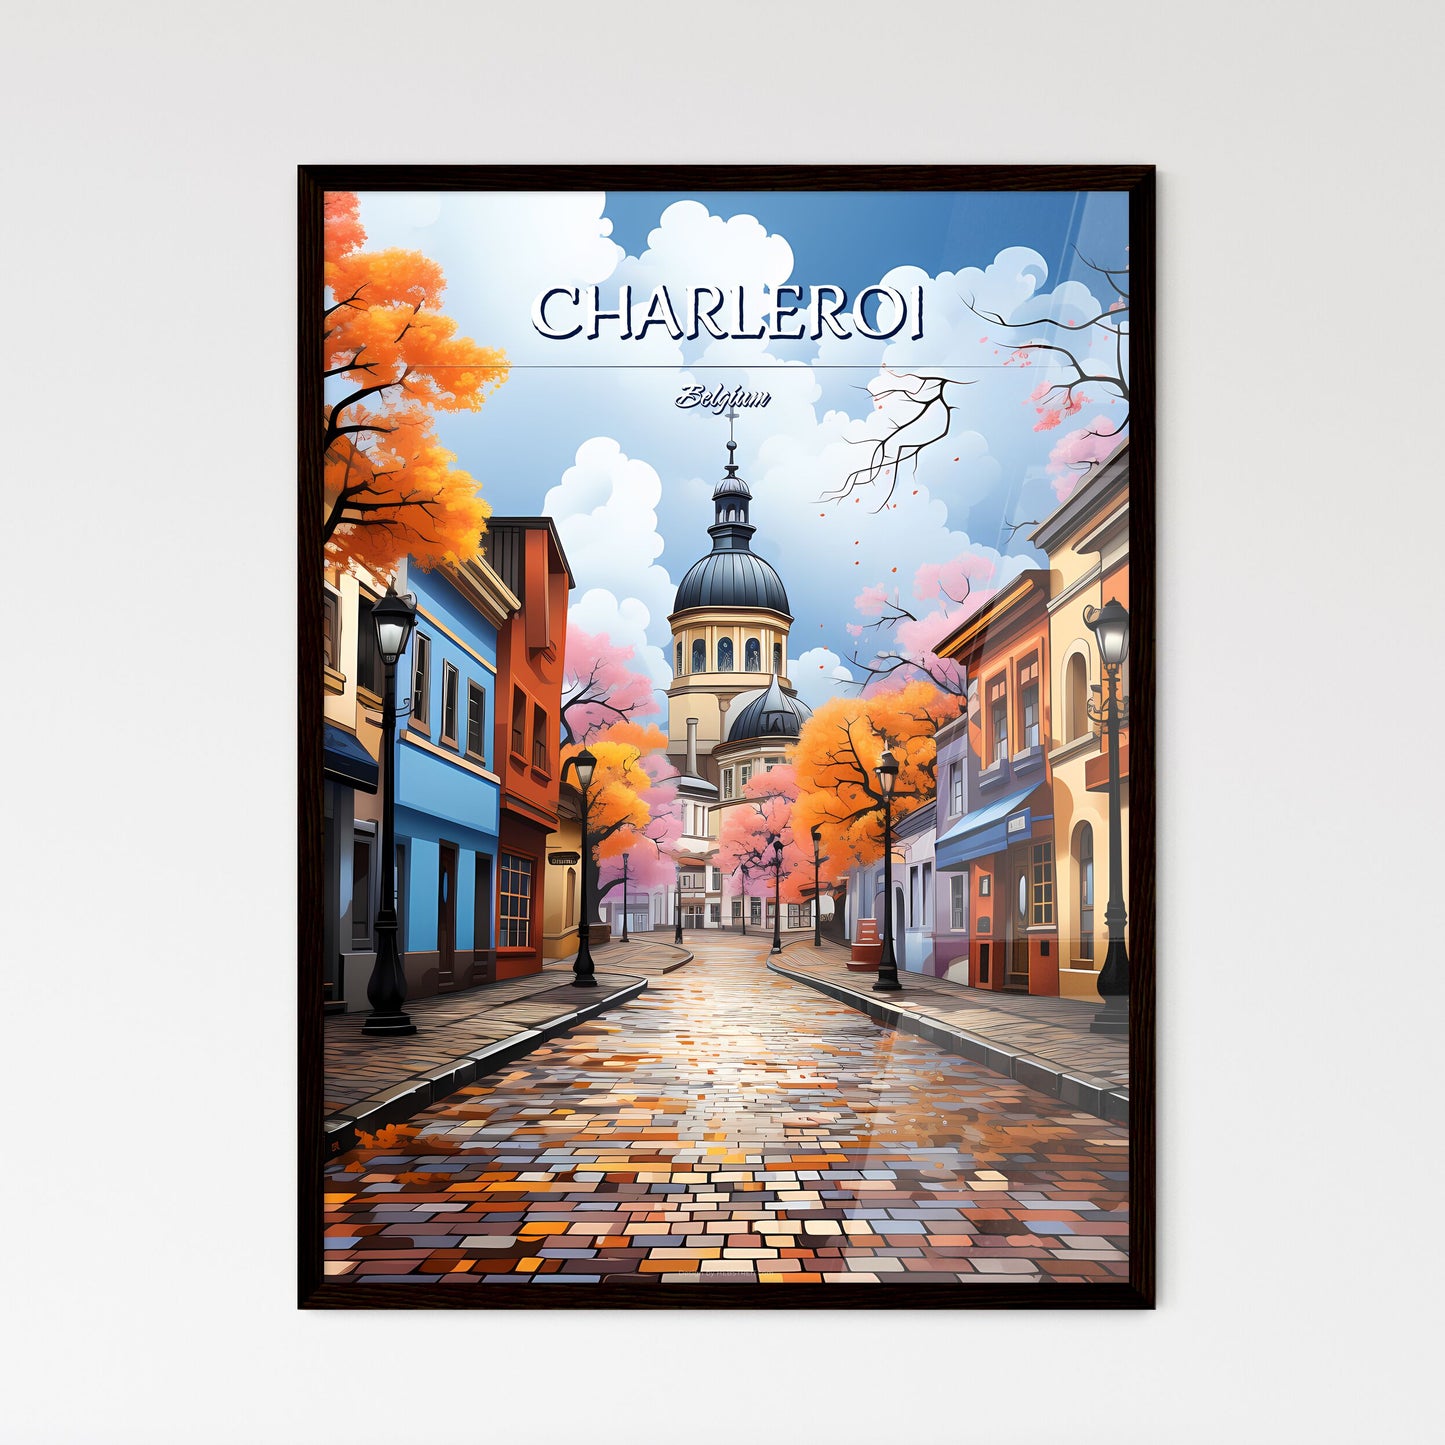 Charleroi, Belgium - Art print of a street with colorful buildings and trees Default Title